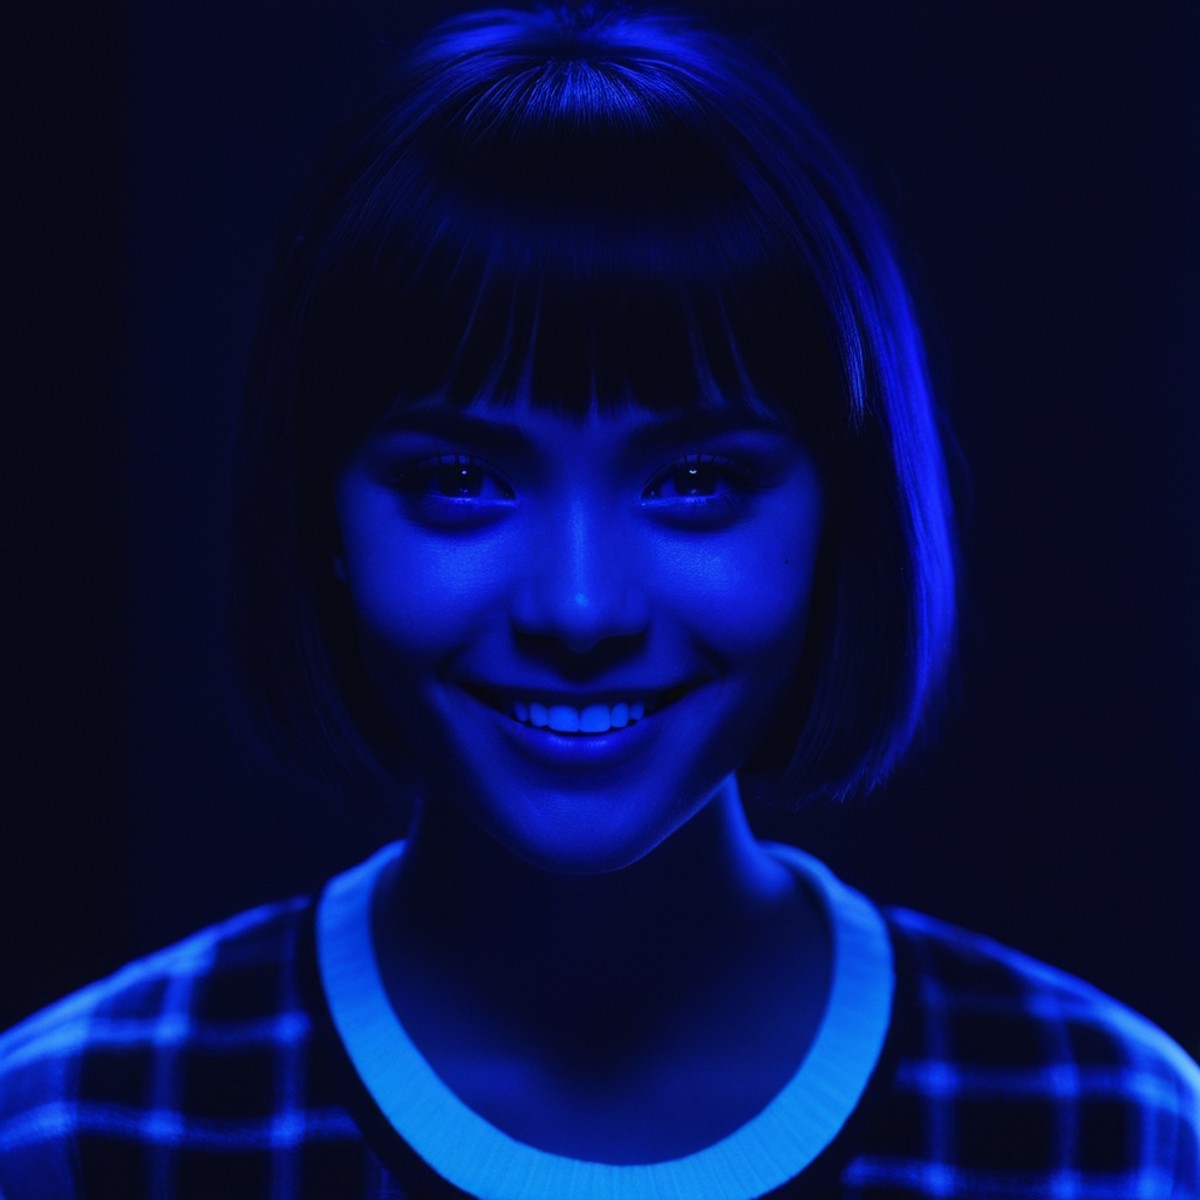 cinematic film still of  <lora:Ultraviolet lighting Style:1>
a woman with a blue glow on her face Ultraviolet lighting Sty...